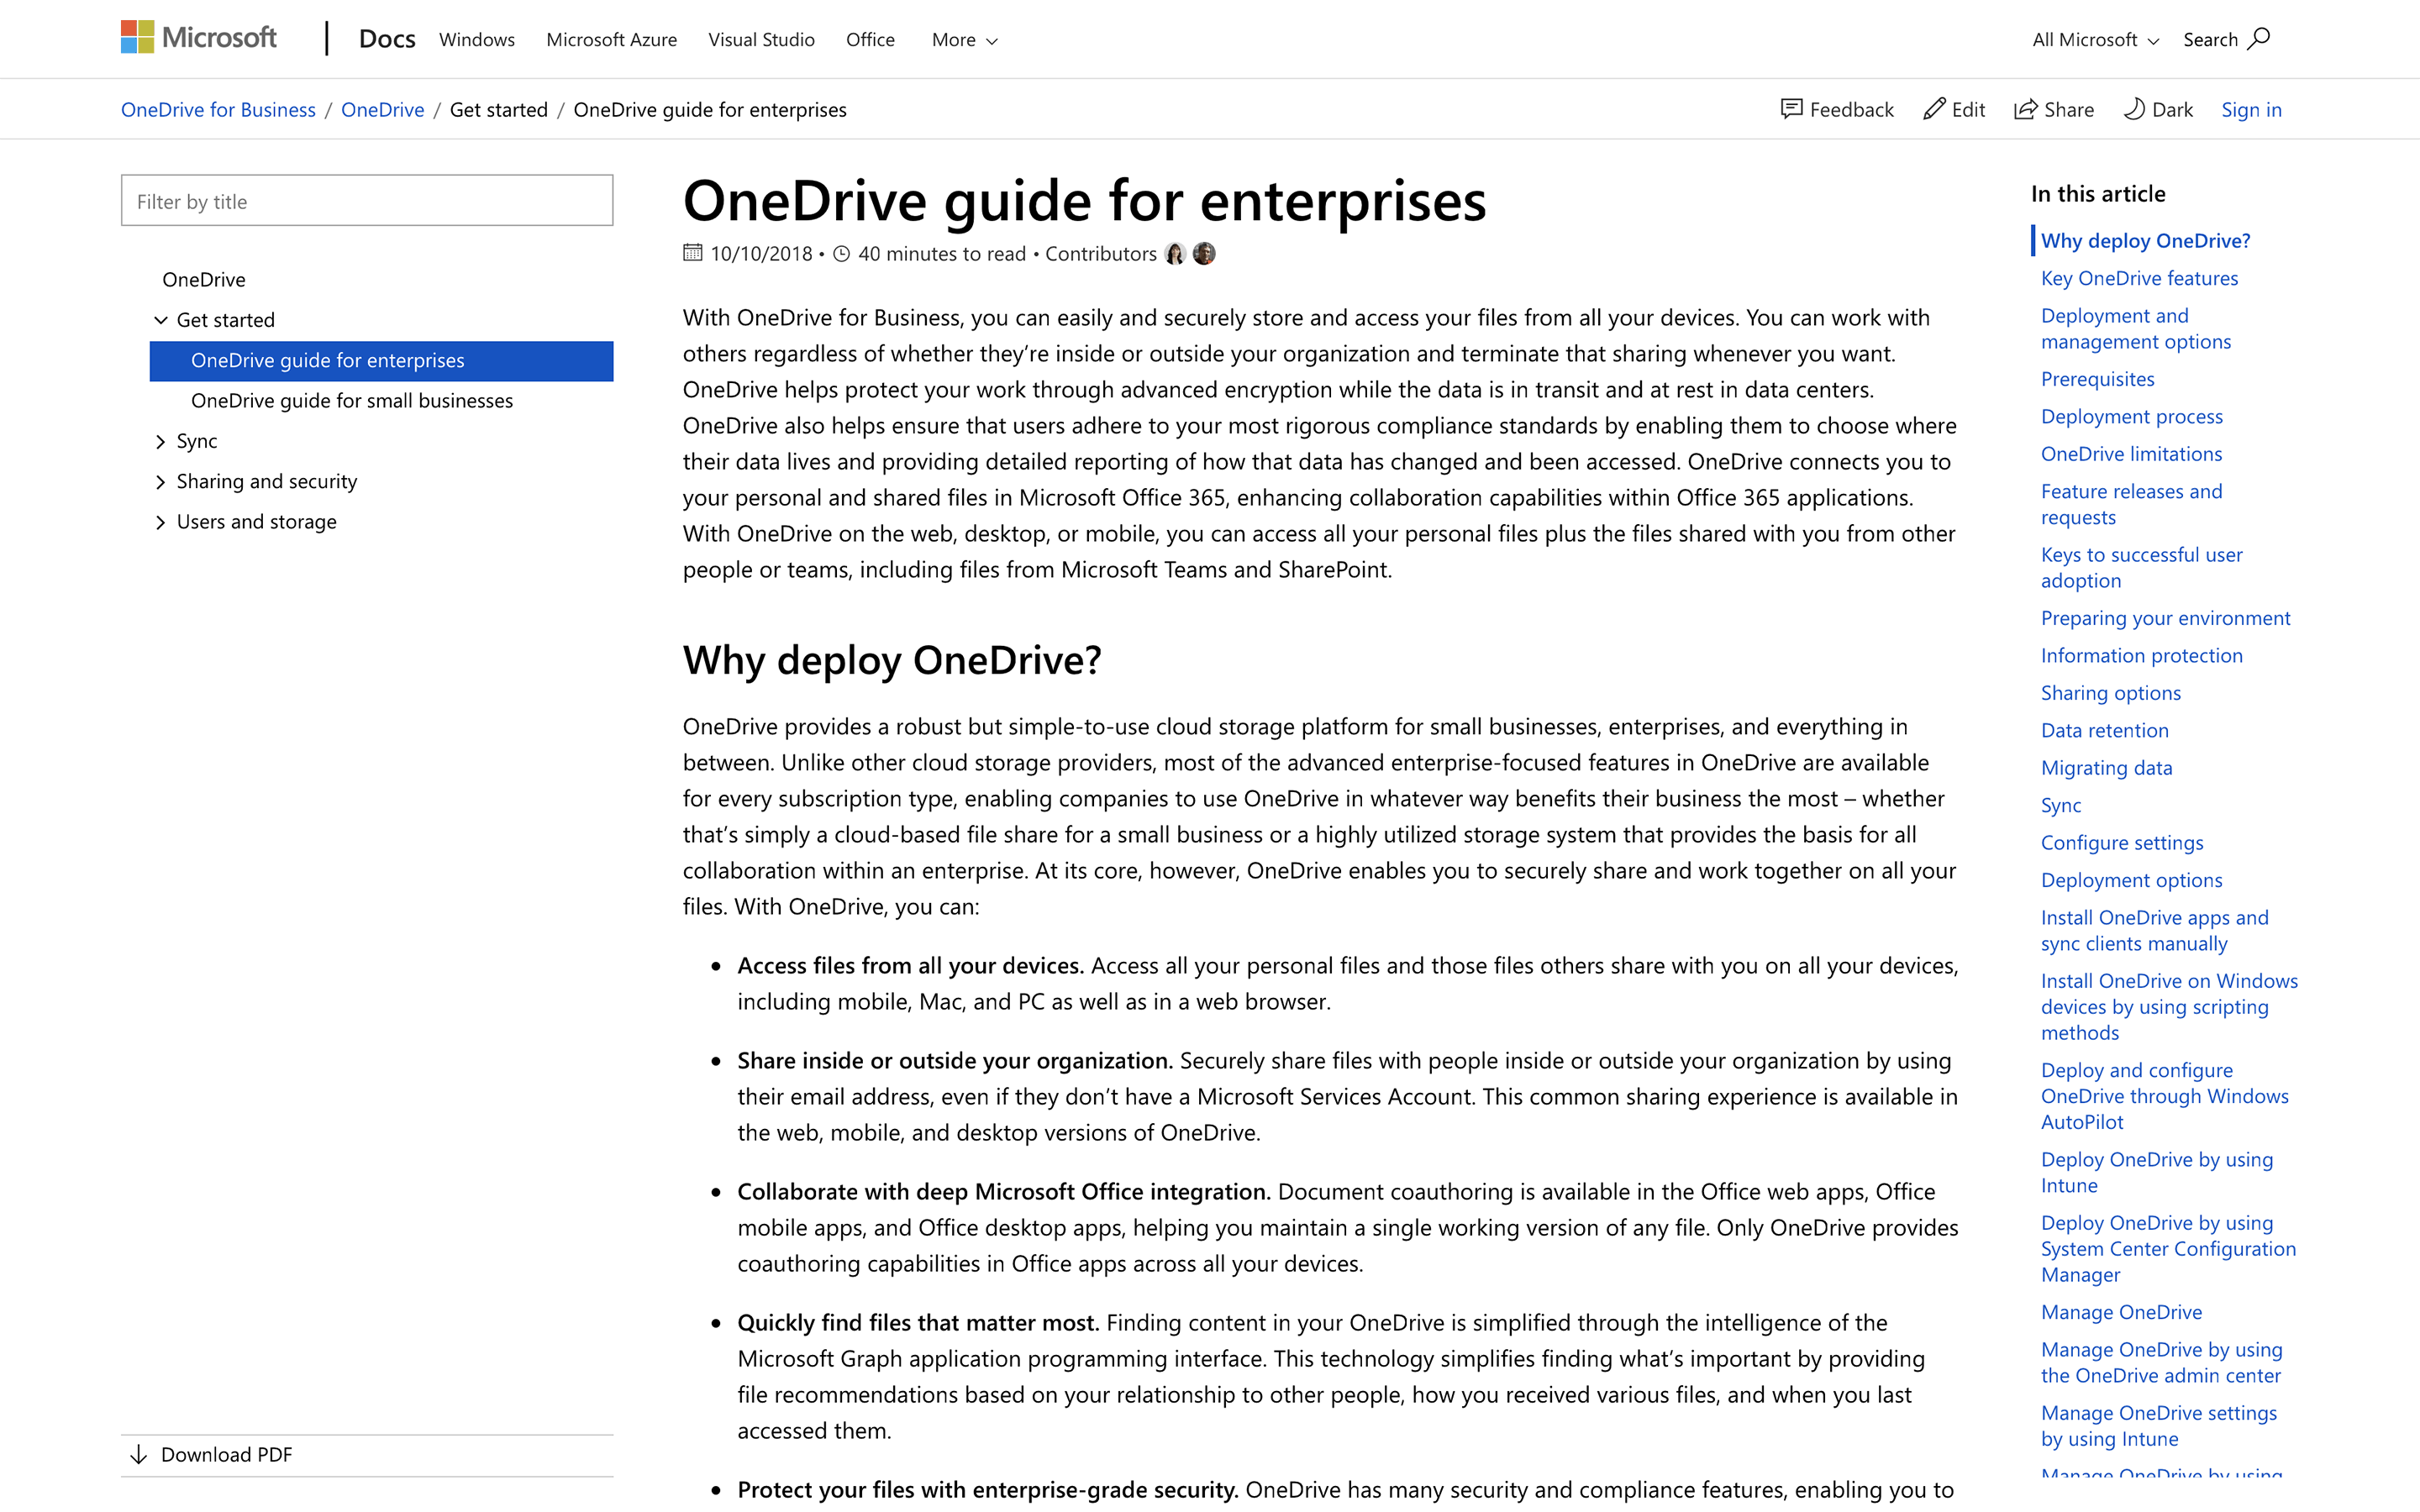 Screenshot of the introduction to the OneDrive Guide for enterprises